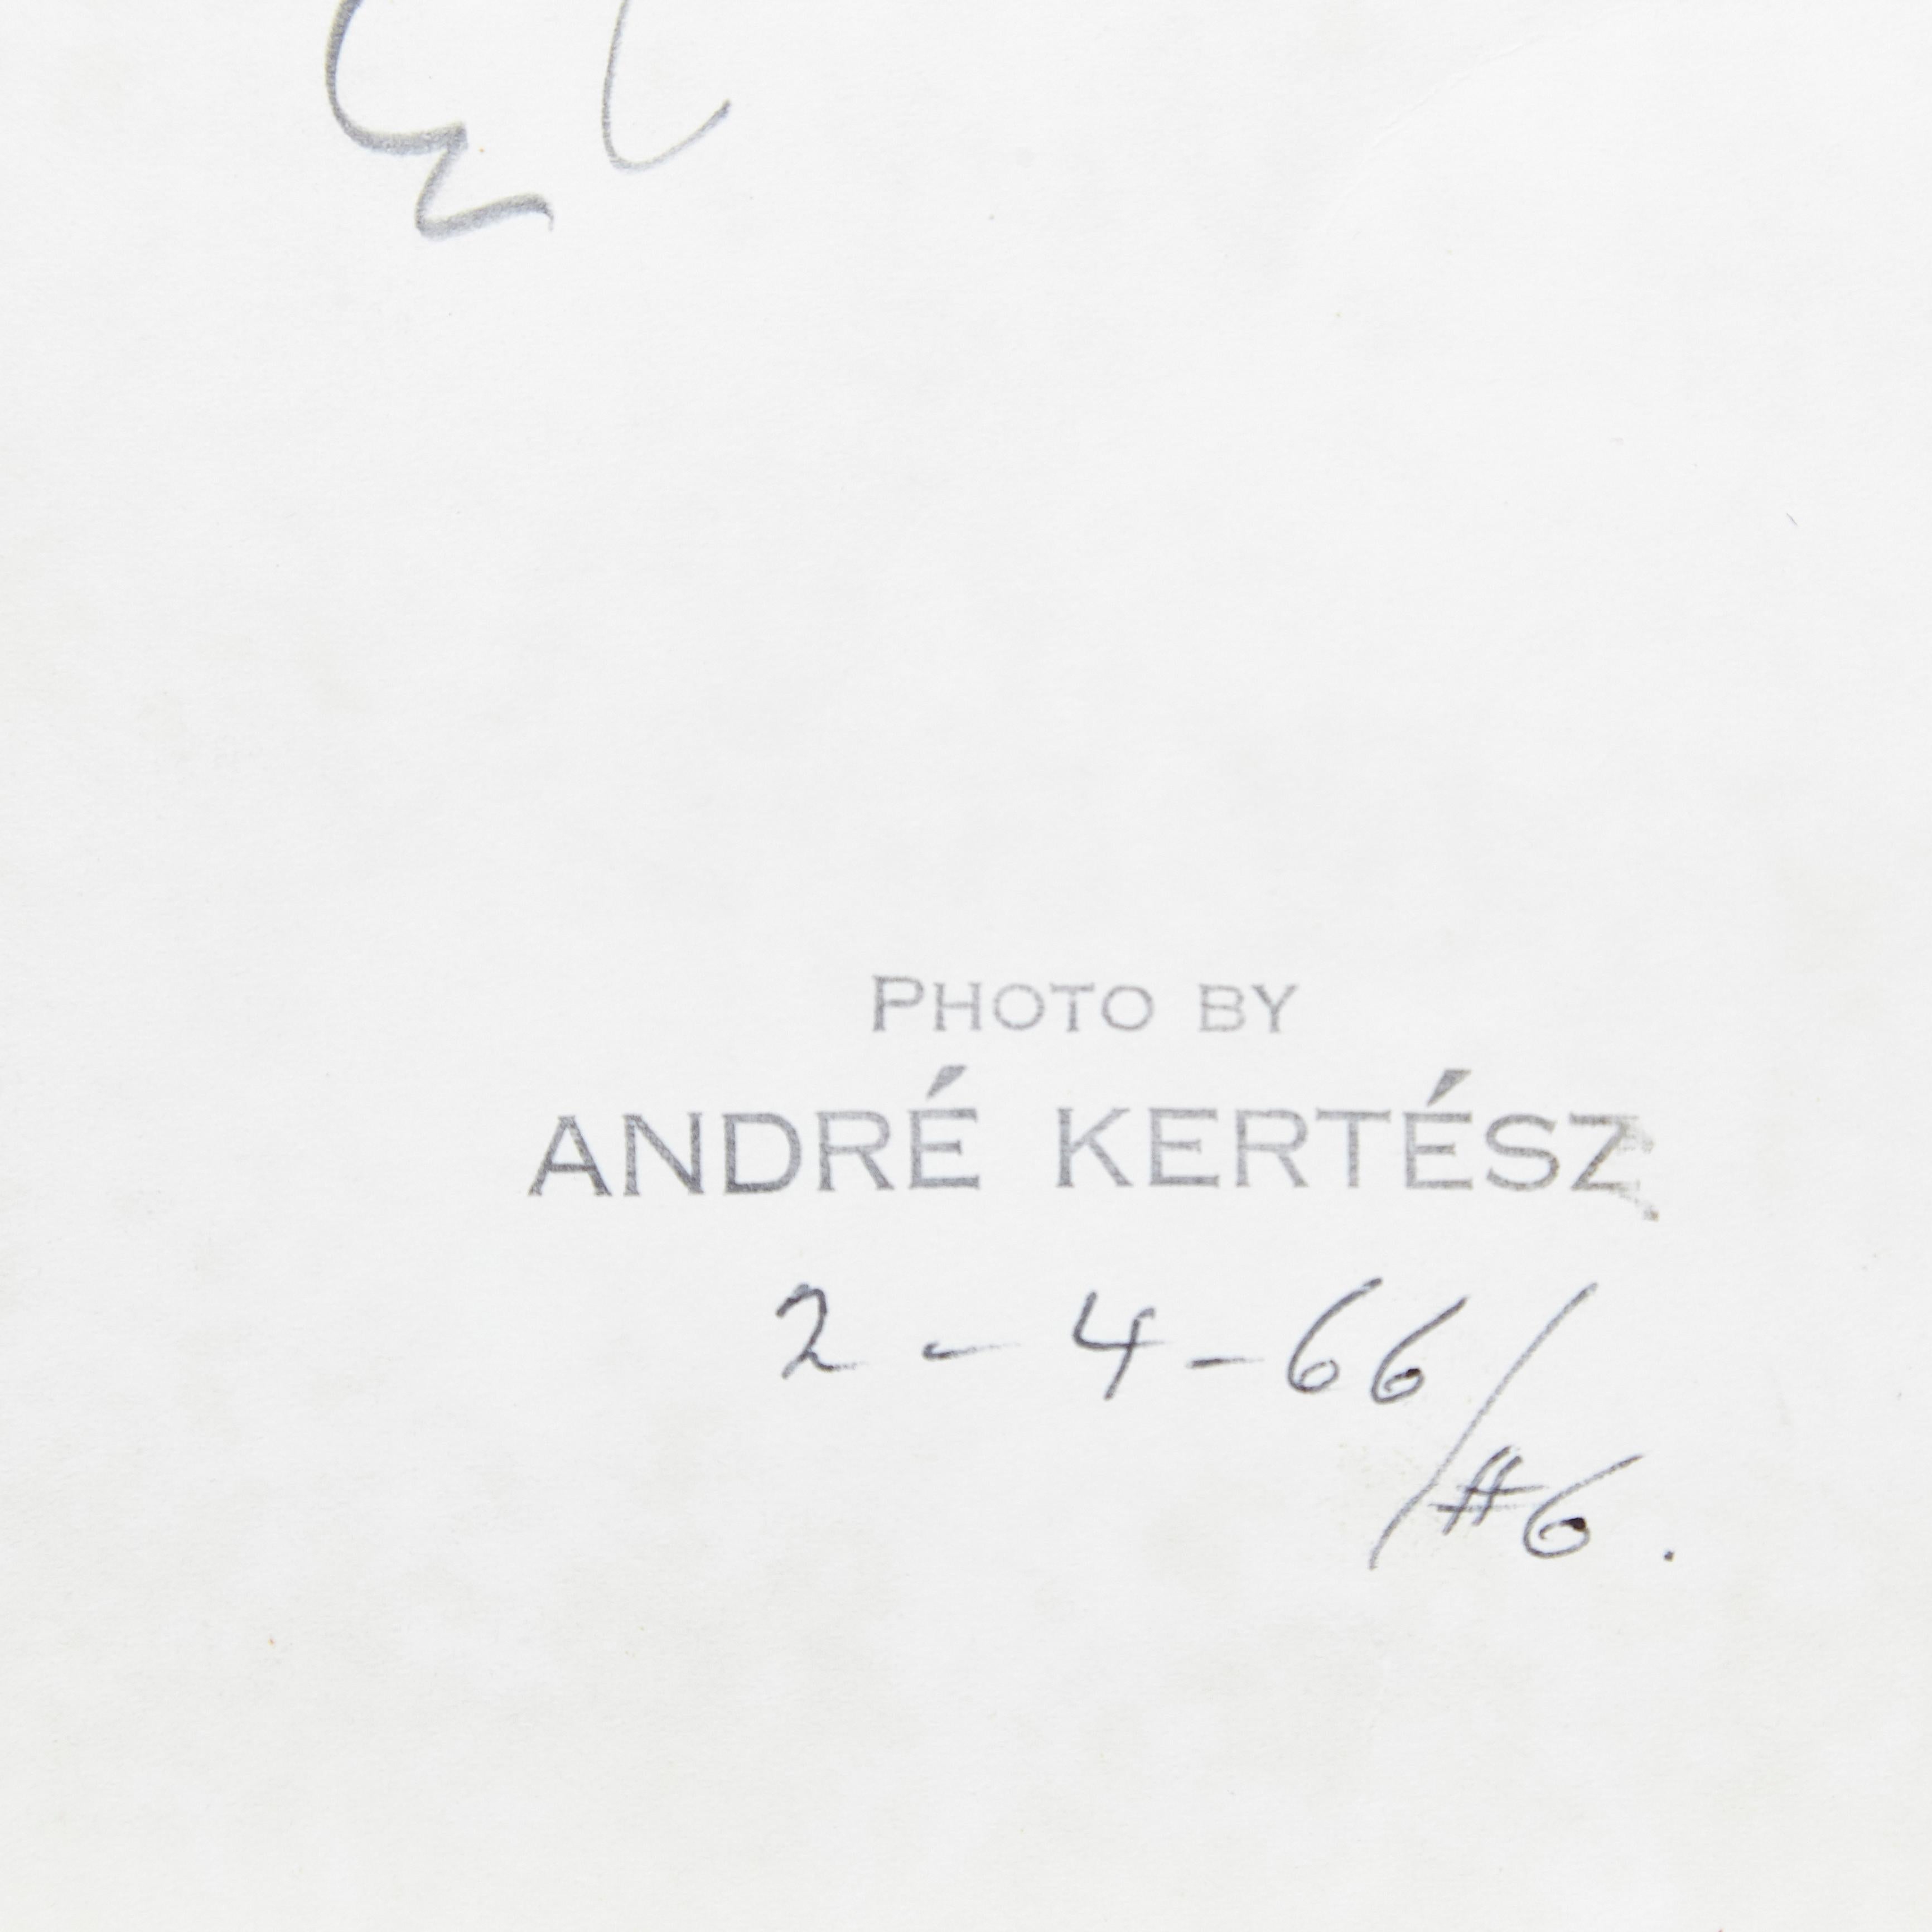 Paper Andre Kerstesz Photography